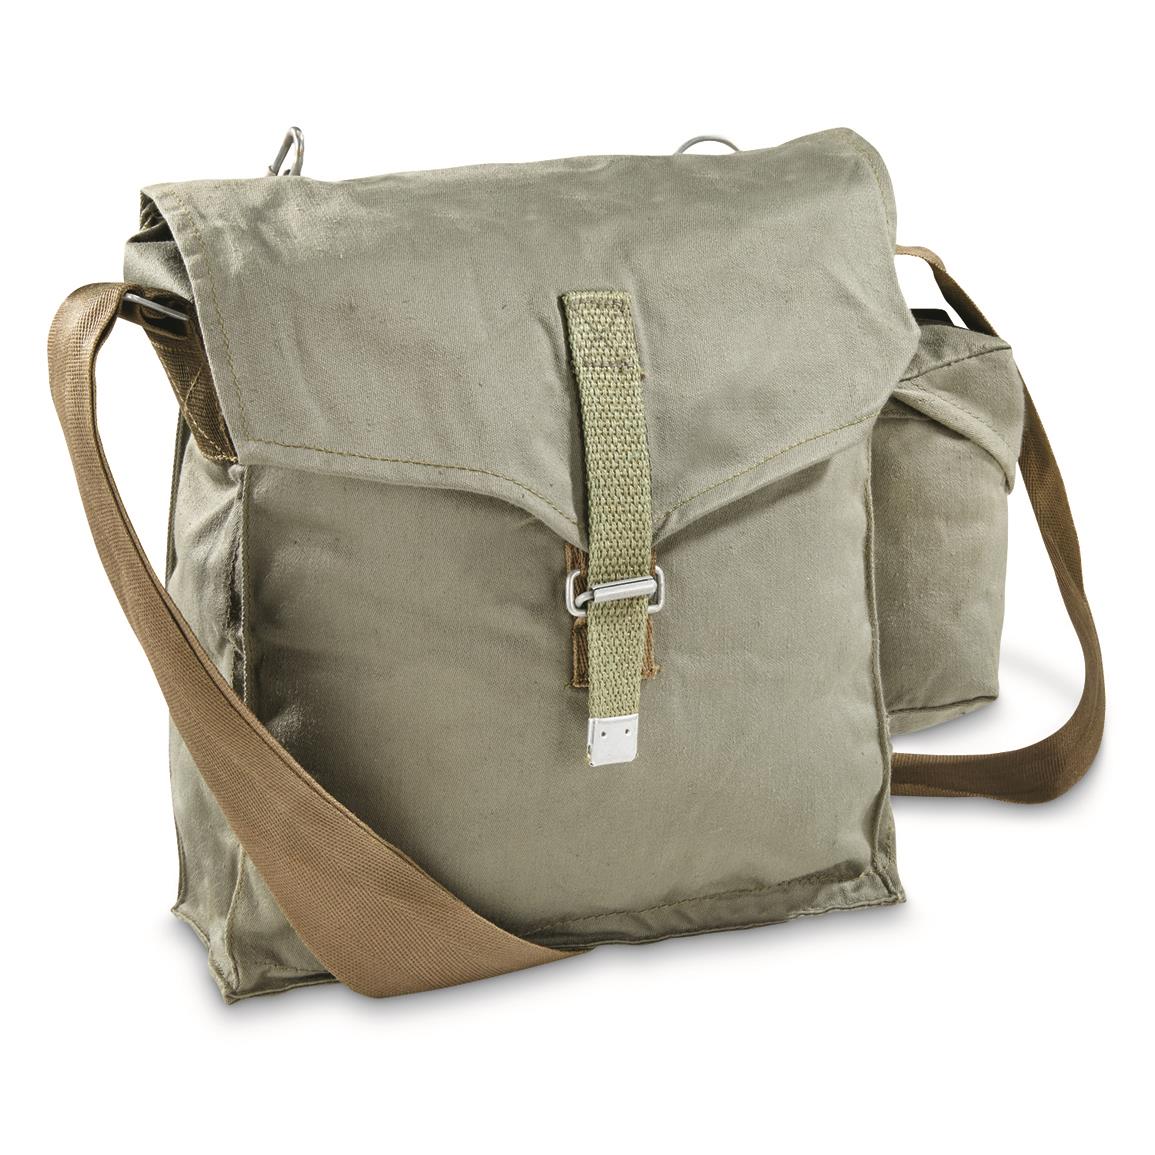 Polish Military Surplus Canvas Shoulder Bags, 4 Pack, Used - 703689 ...